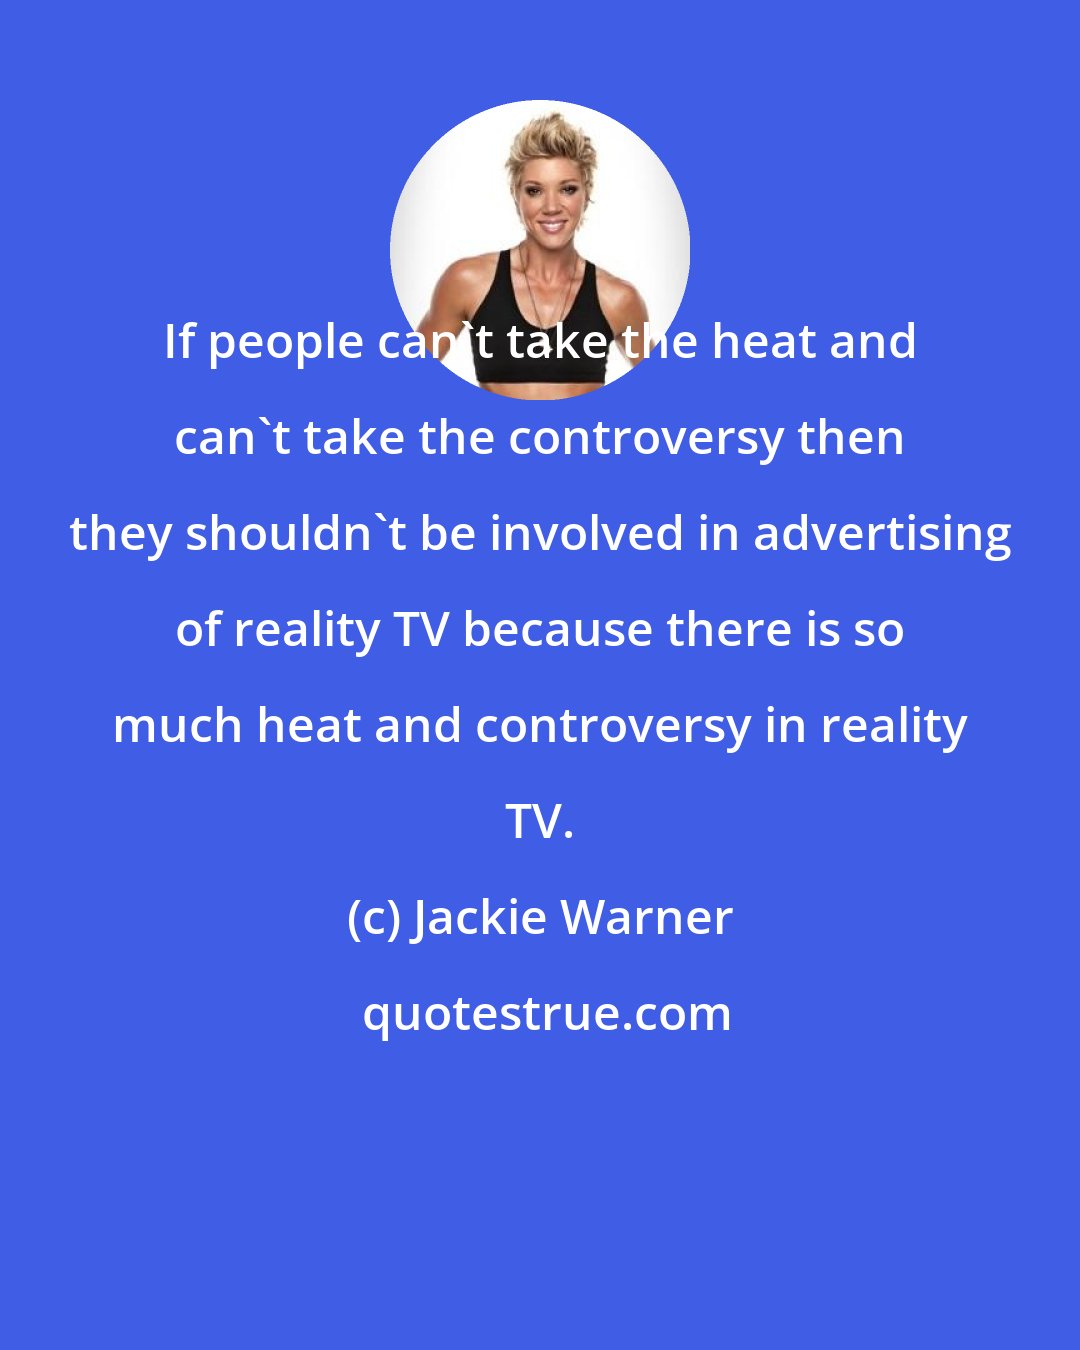 Jackie Warner: If people can't take the heat and can't take the controversy then they shouldn't be involved in advertising of reality TV because there is so much heat and controversy in reality TV.